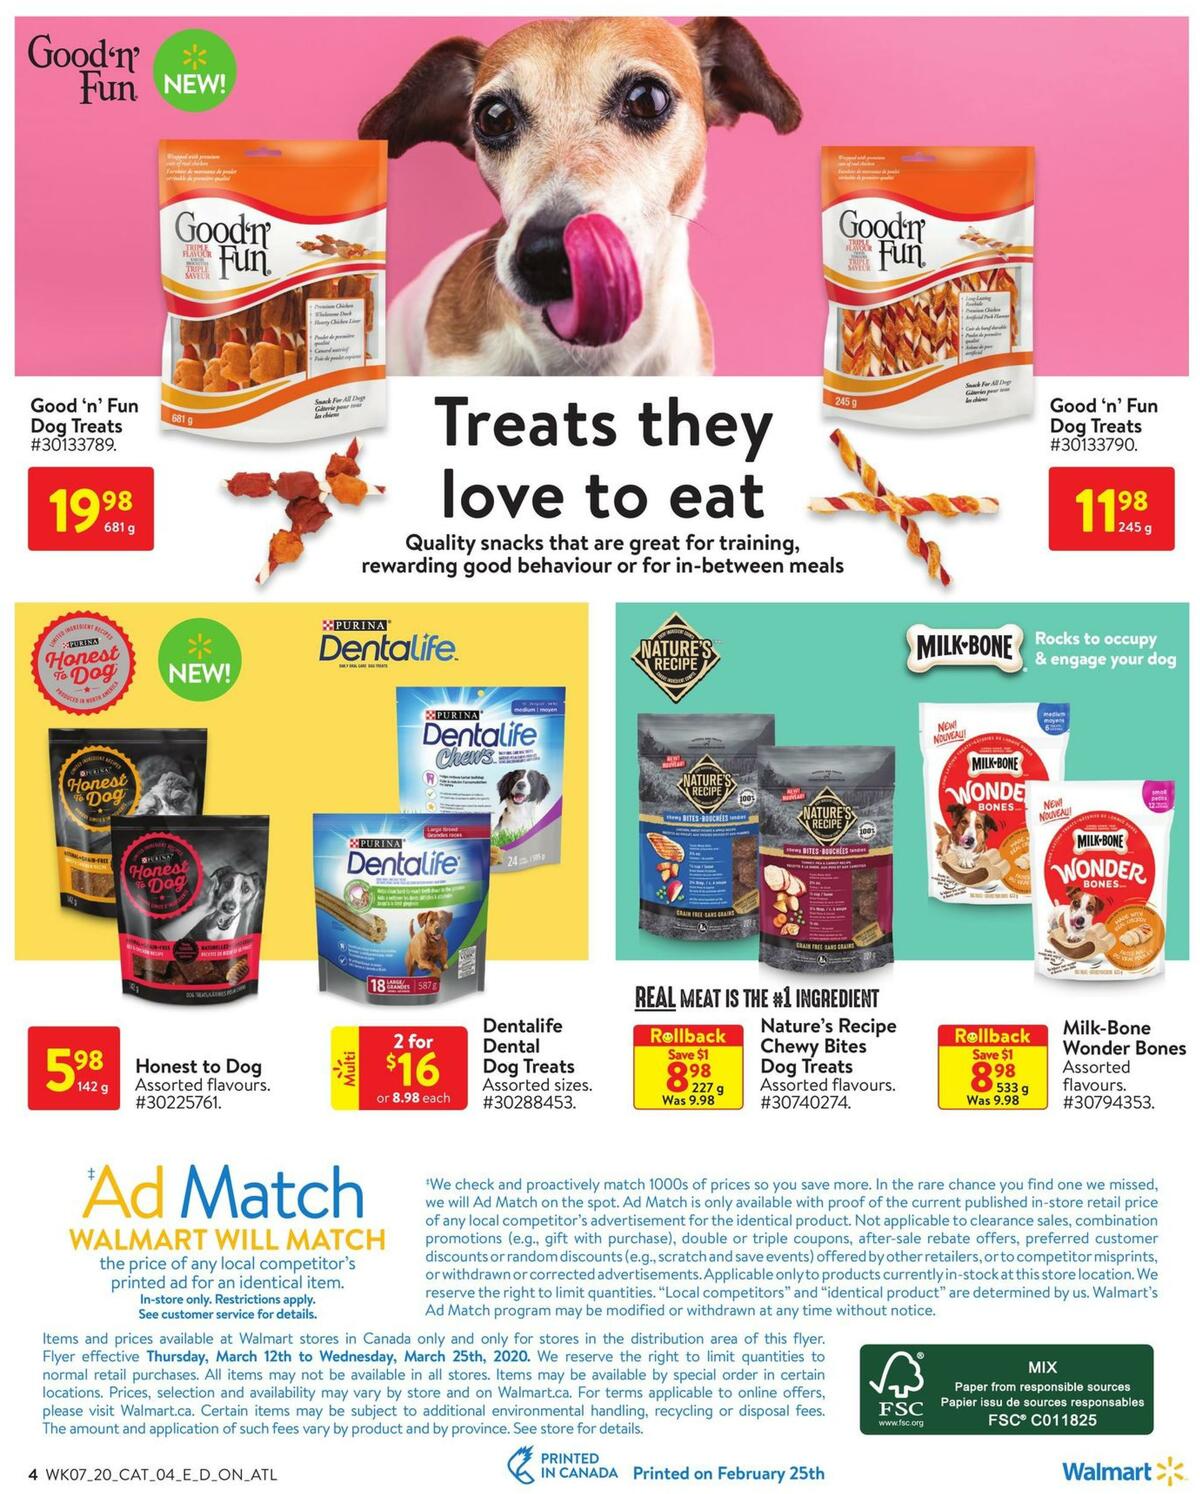 Walmart Pets Flyer from March 12